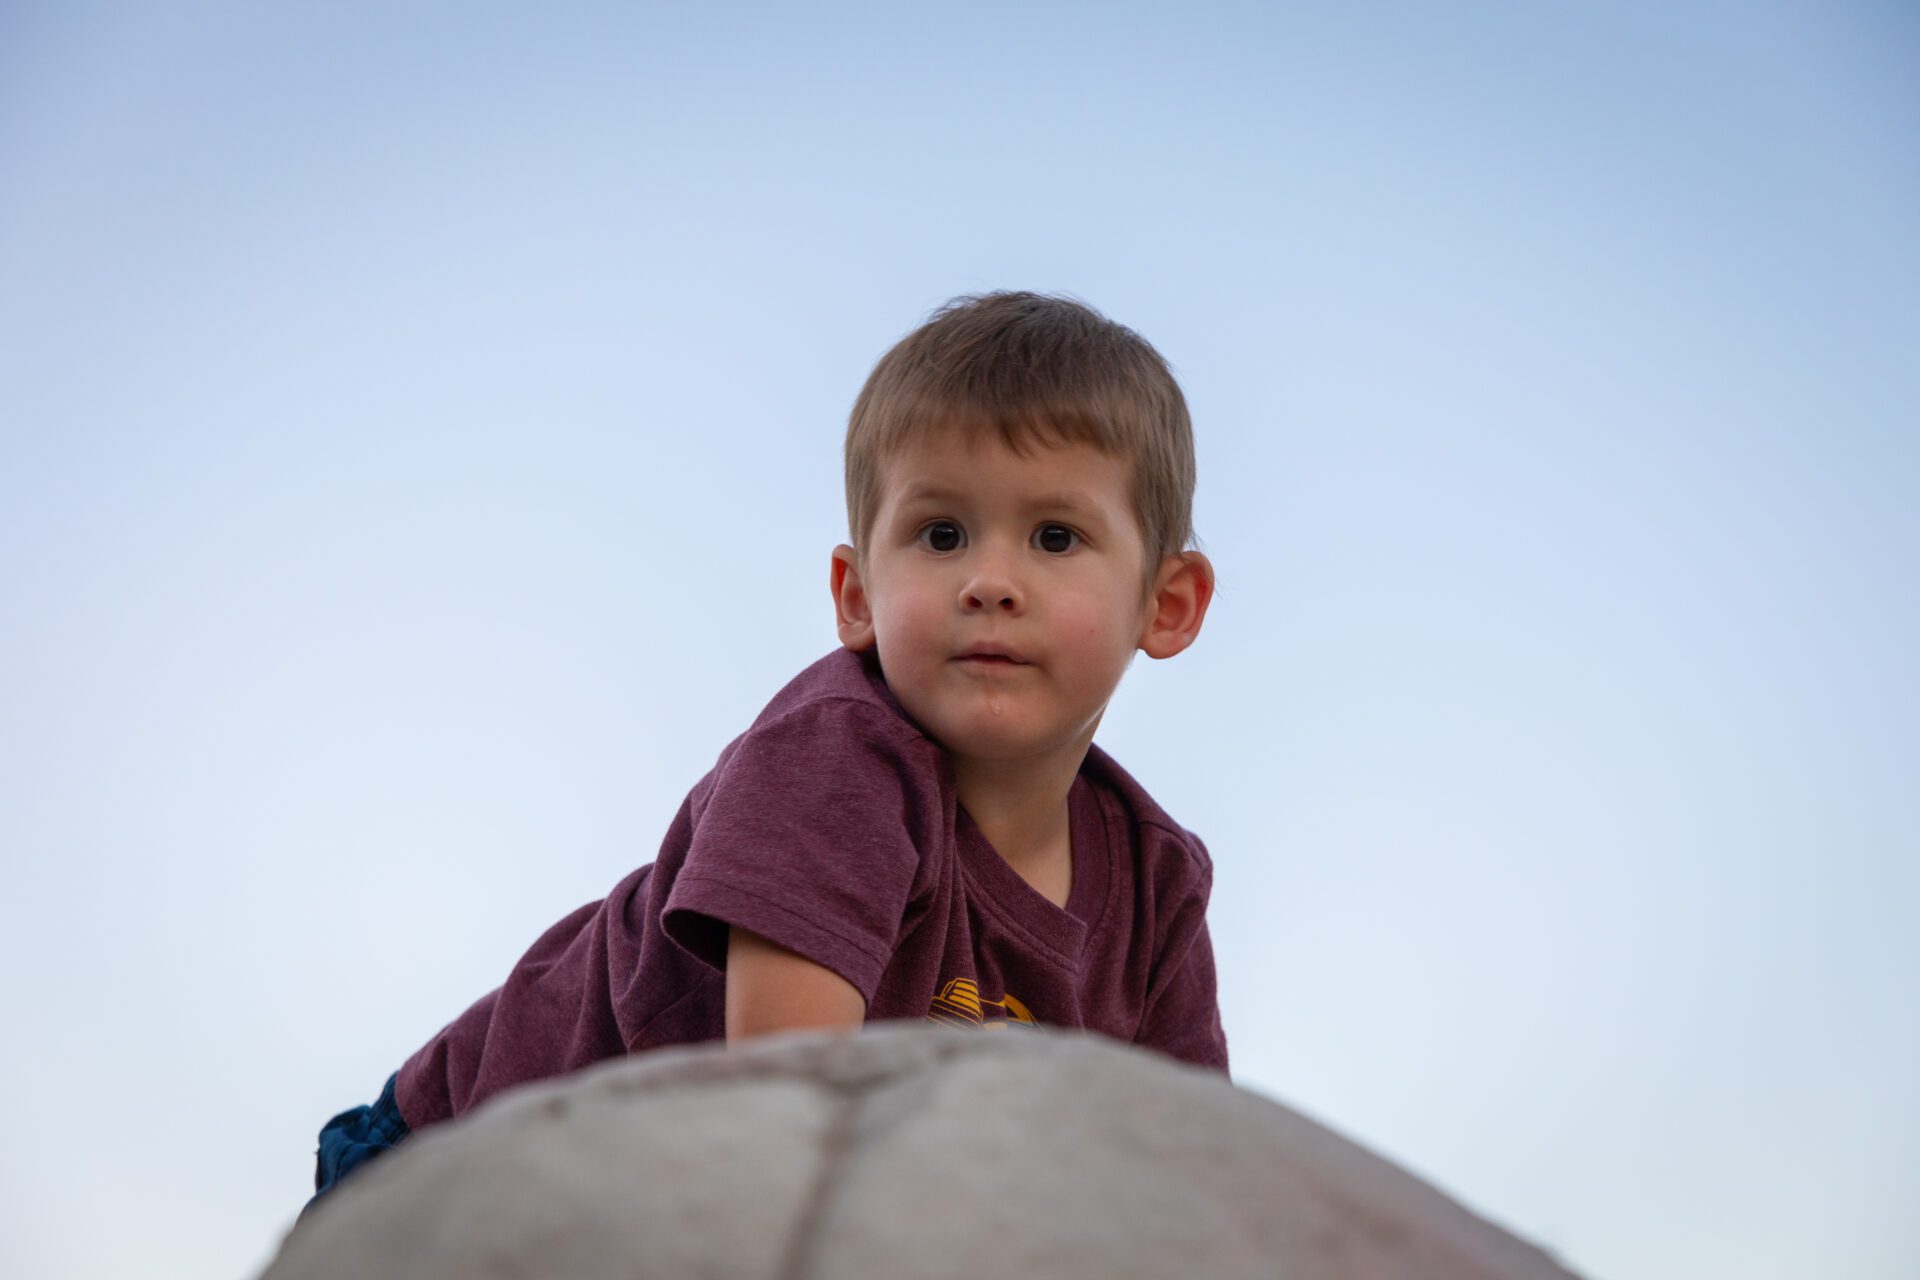 Nash poses for a photo on top of a rock climbing wall.